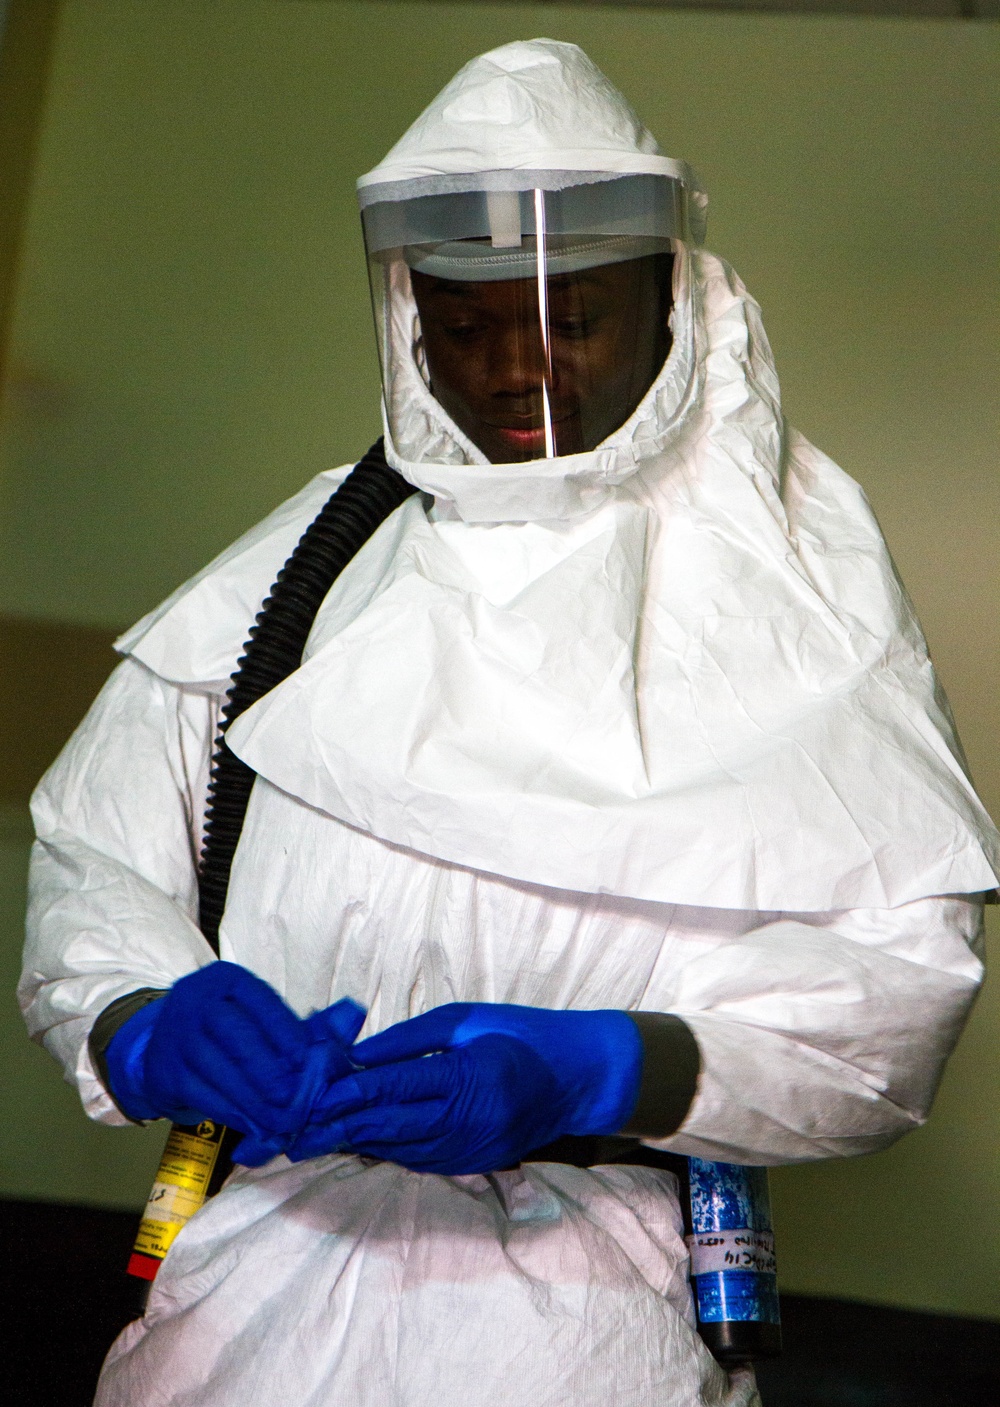 From fighting insurgents to fighting Ebola